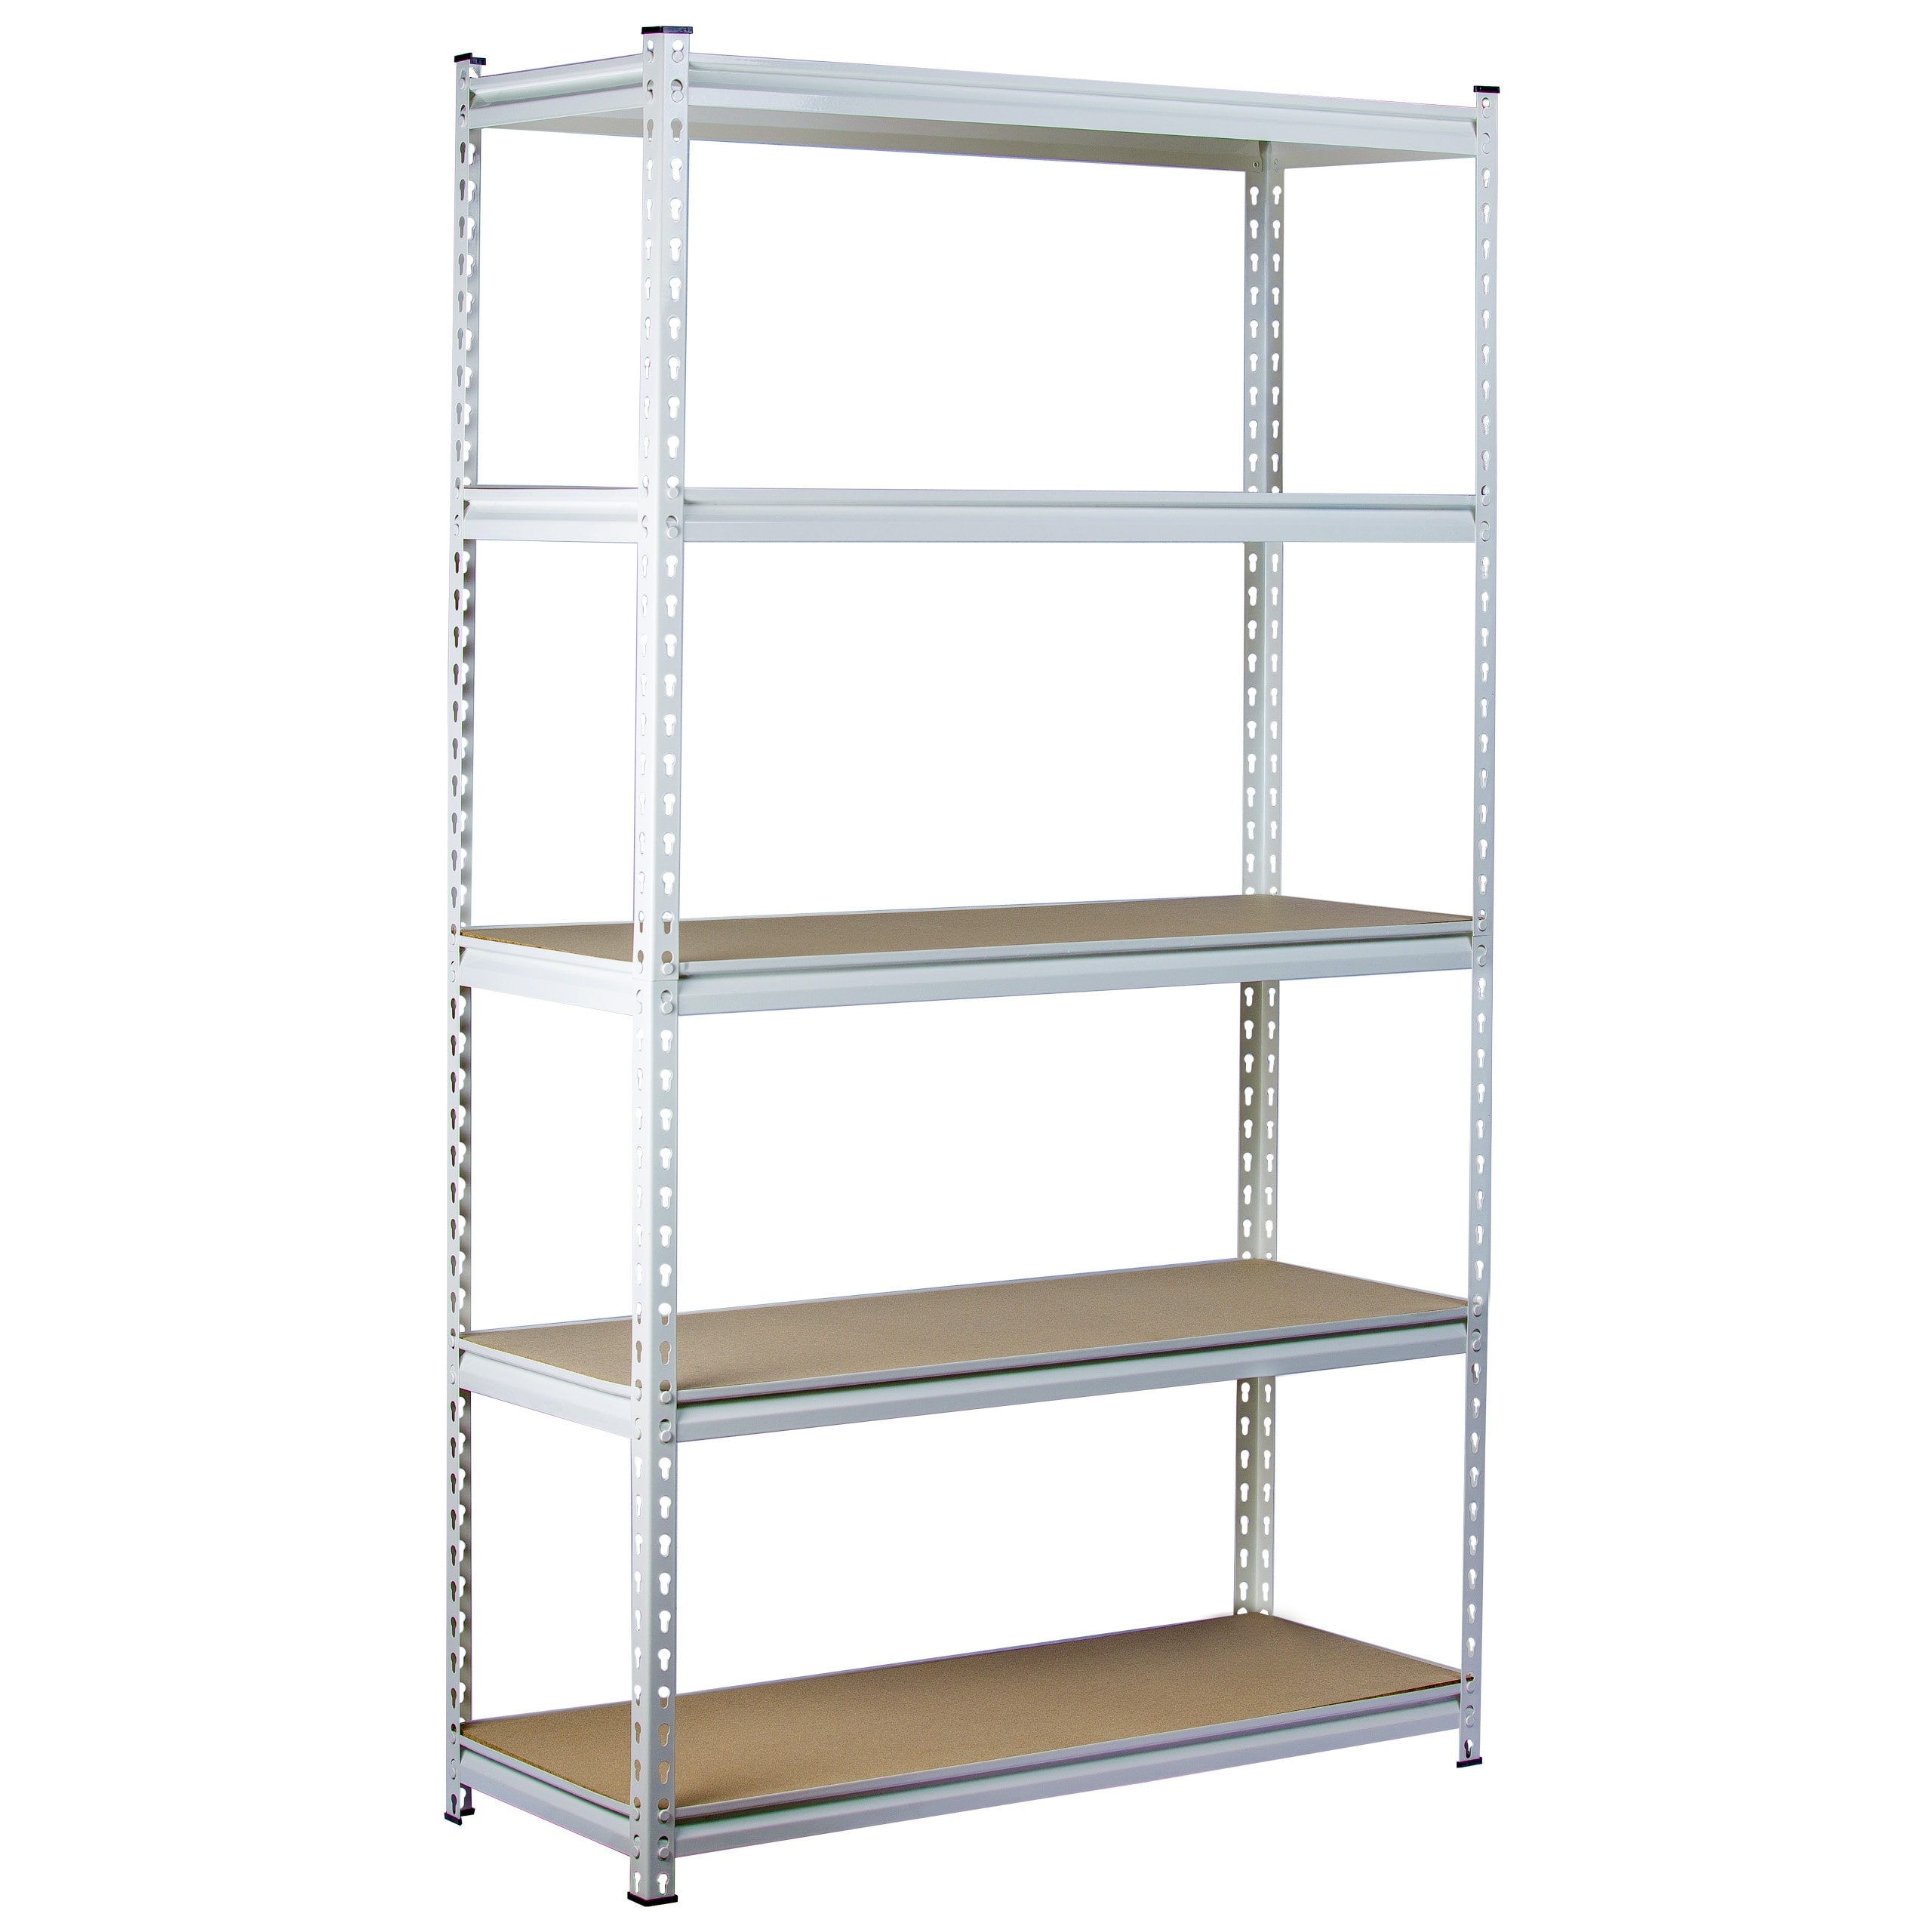 https://ak1.ostkcdn.com/images/products/is/images/direct/301a153eda326c0bbf195478d90d8fc479ae7f66/King%27s-Rack-5-Tier-White-Steel-Storage-Rack-Boltless-Shelving-Tier-Height-Adjustable-30%22-W-x-12%22-D-x-60%22-H..jpg